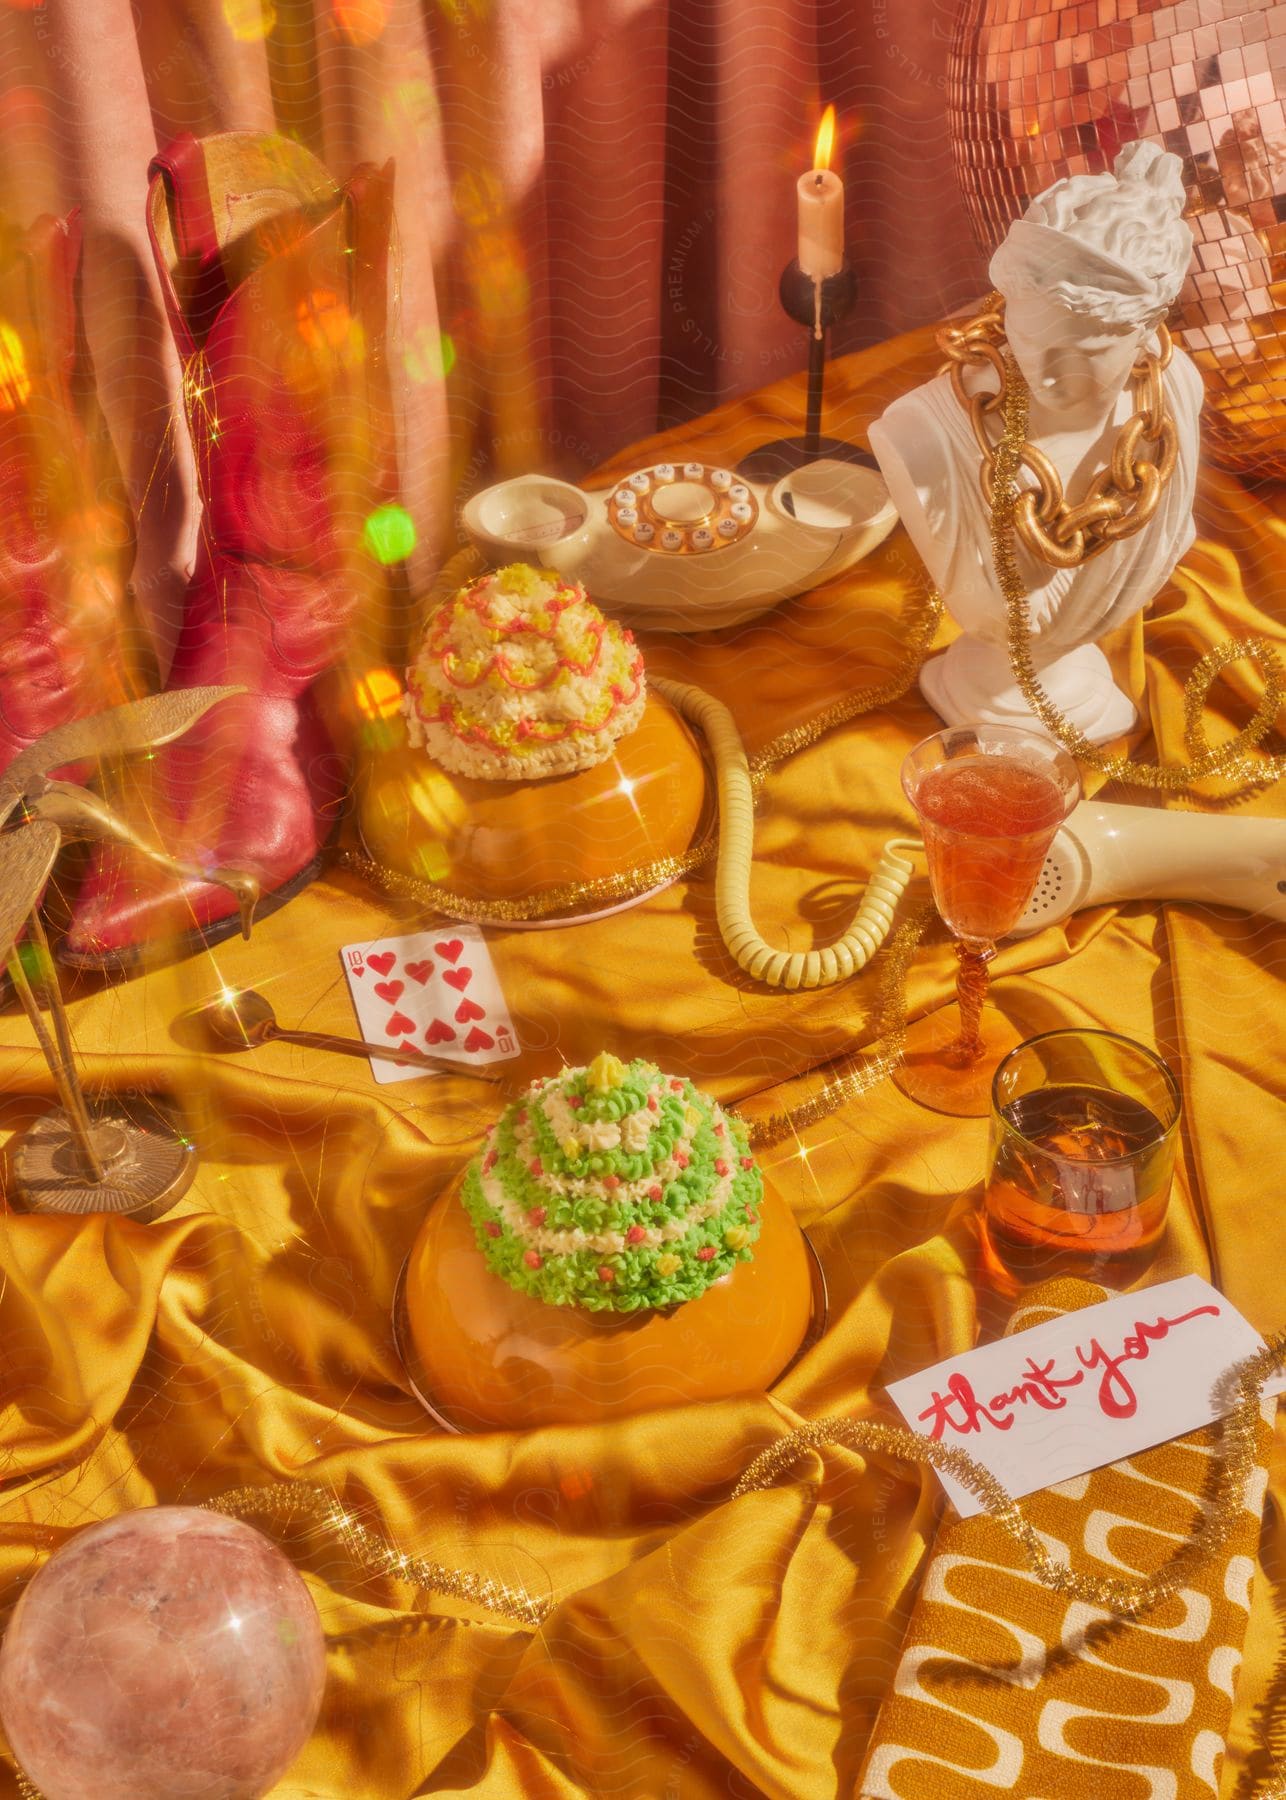 A stilllife picture of pastries drinks and knick knacks on a gold tablecloth